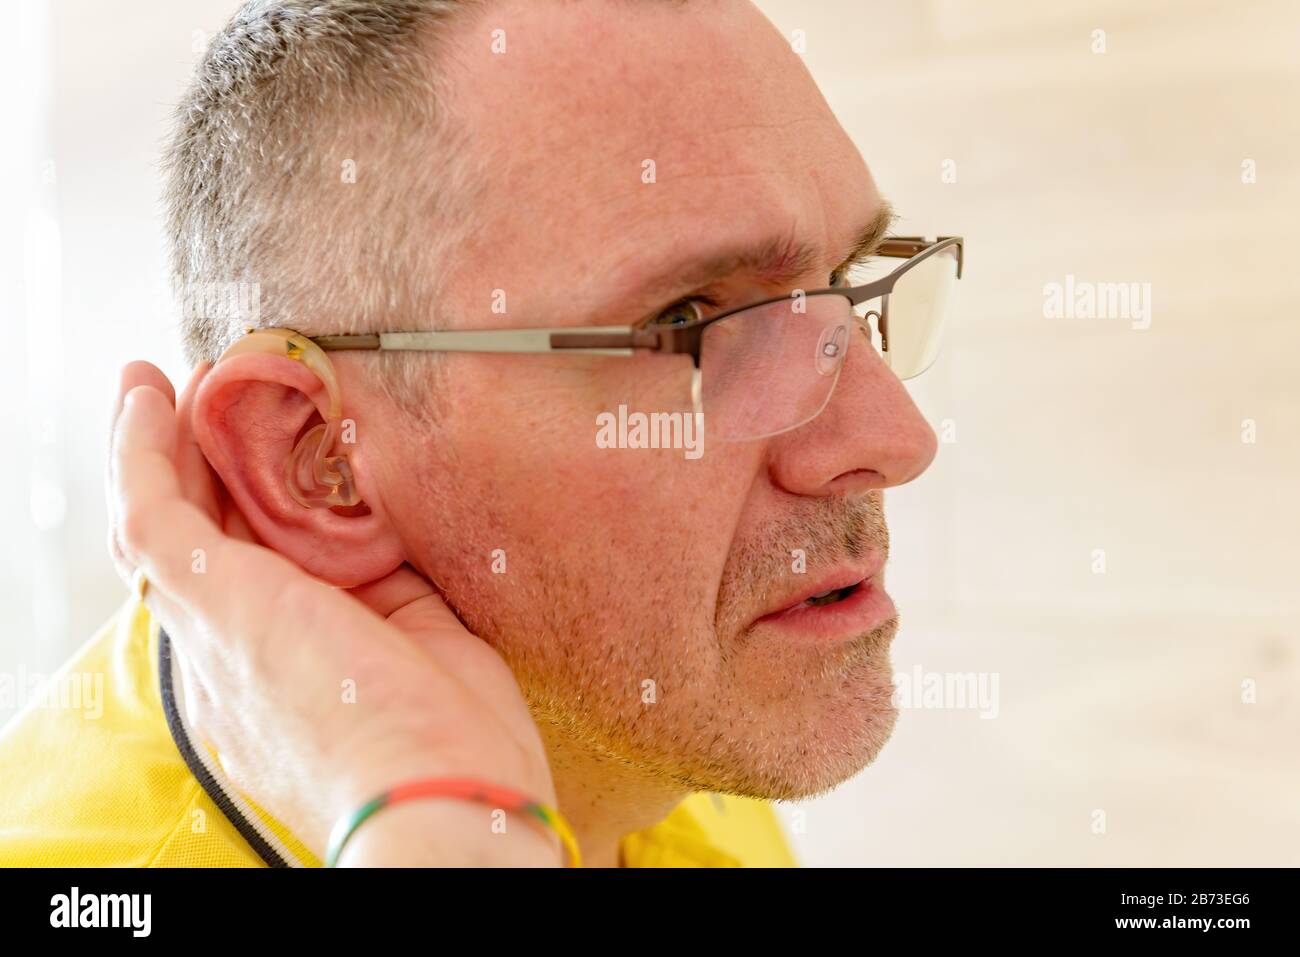 Man wearing deaf aid in ear attempting to hear something Stock Photo